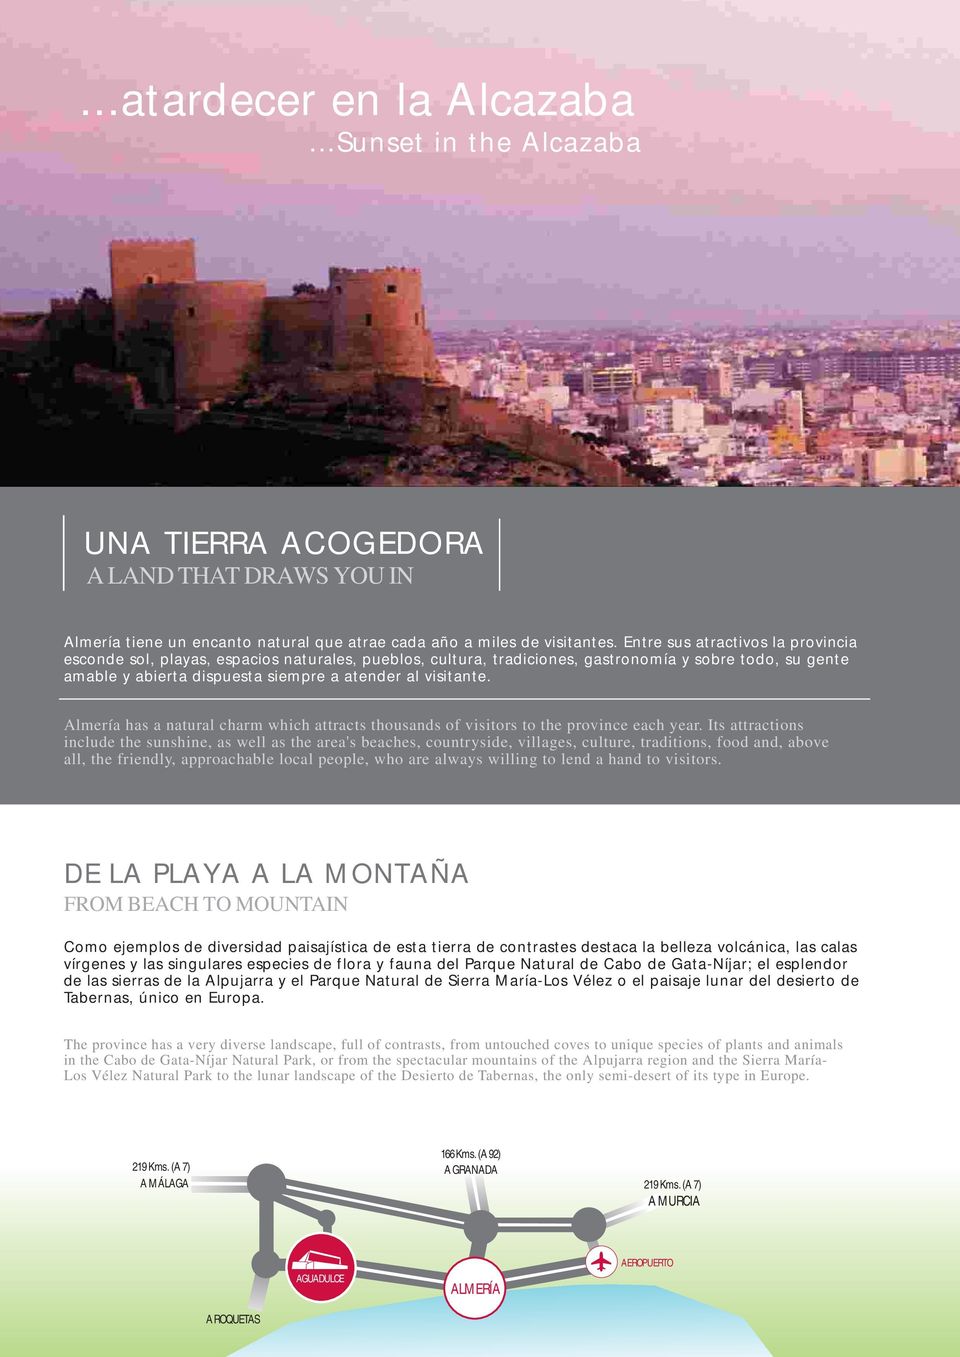 Almería has a natural charm which attracts thousands of visitors to the province each year.